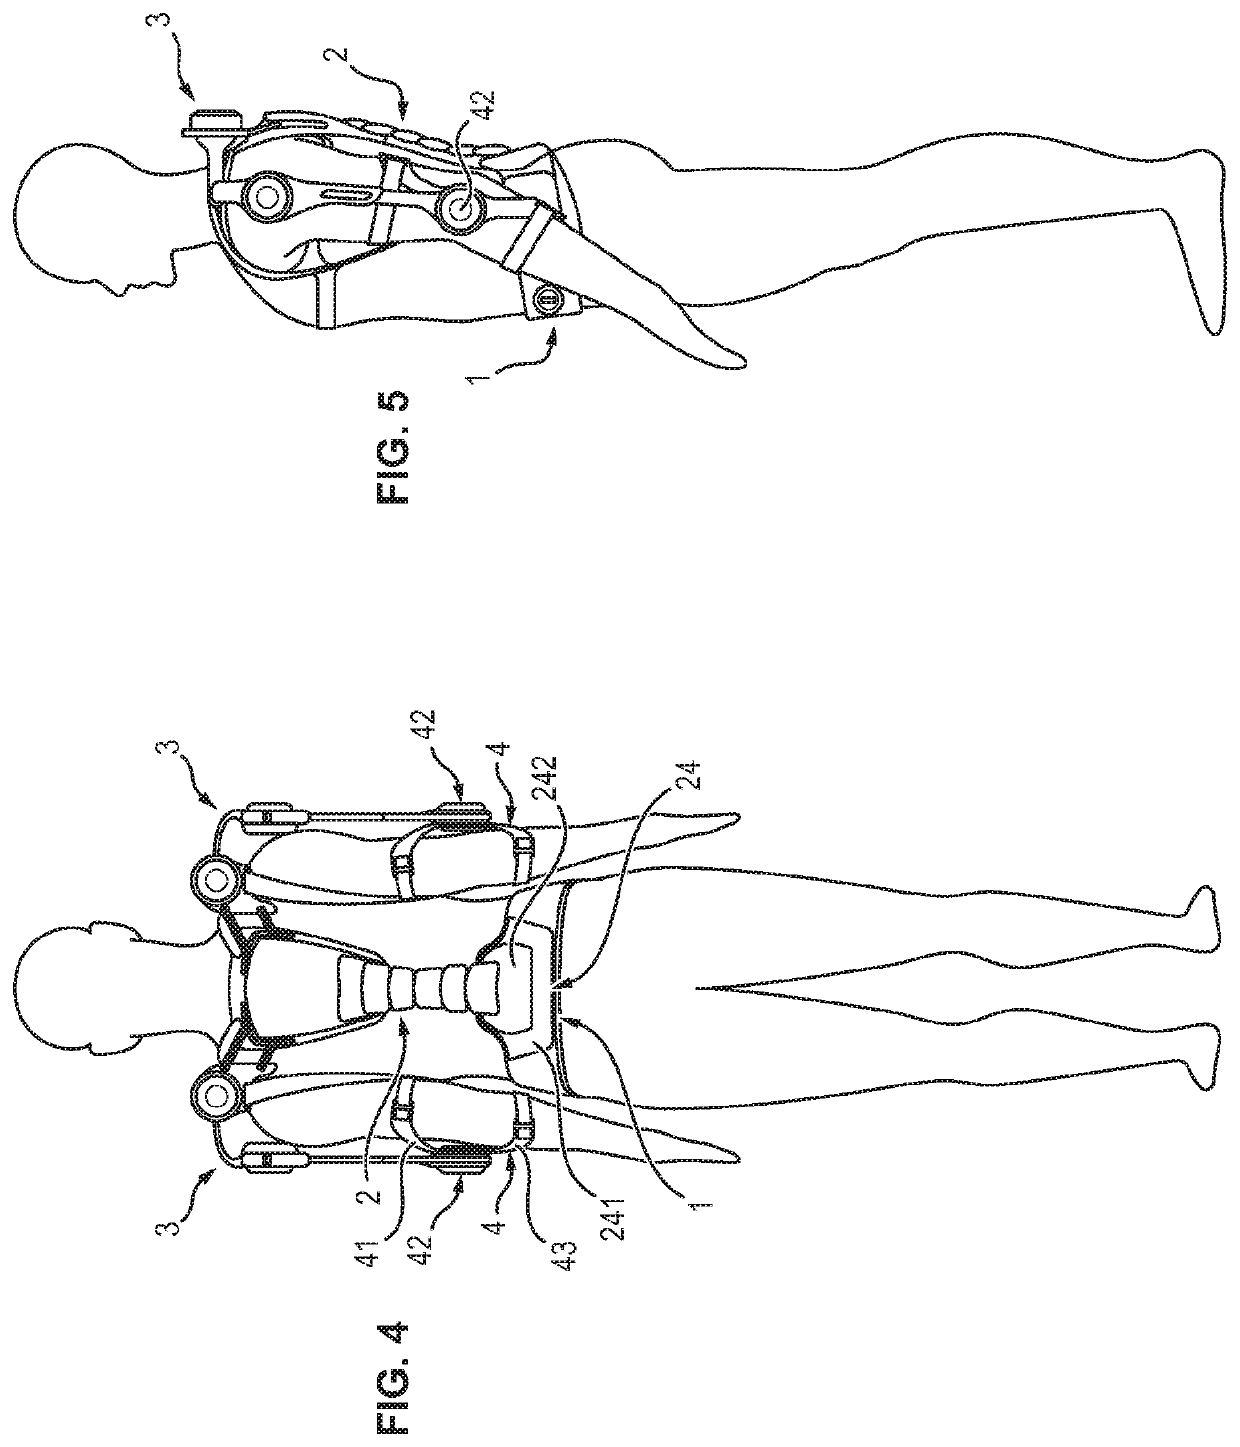 Exoskeleton structure that provides force assistance to the user